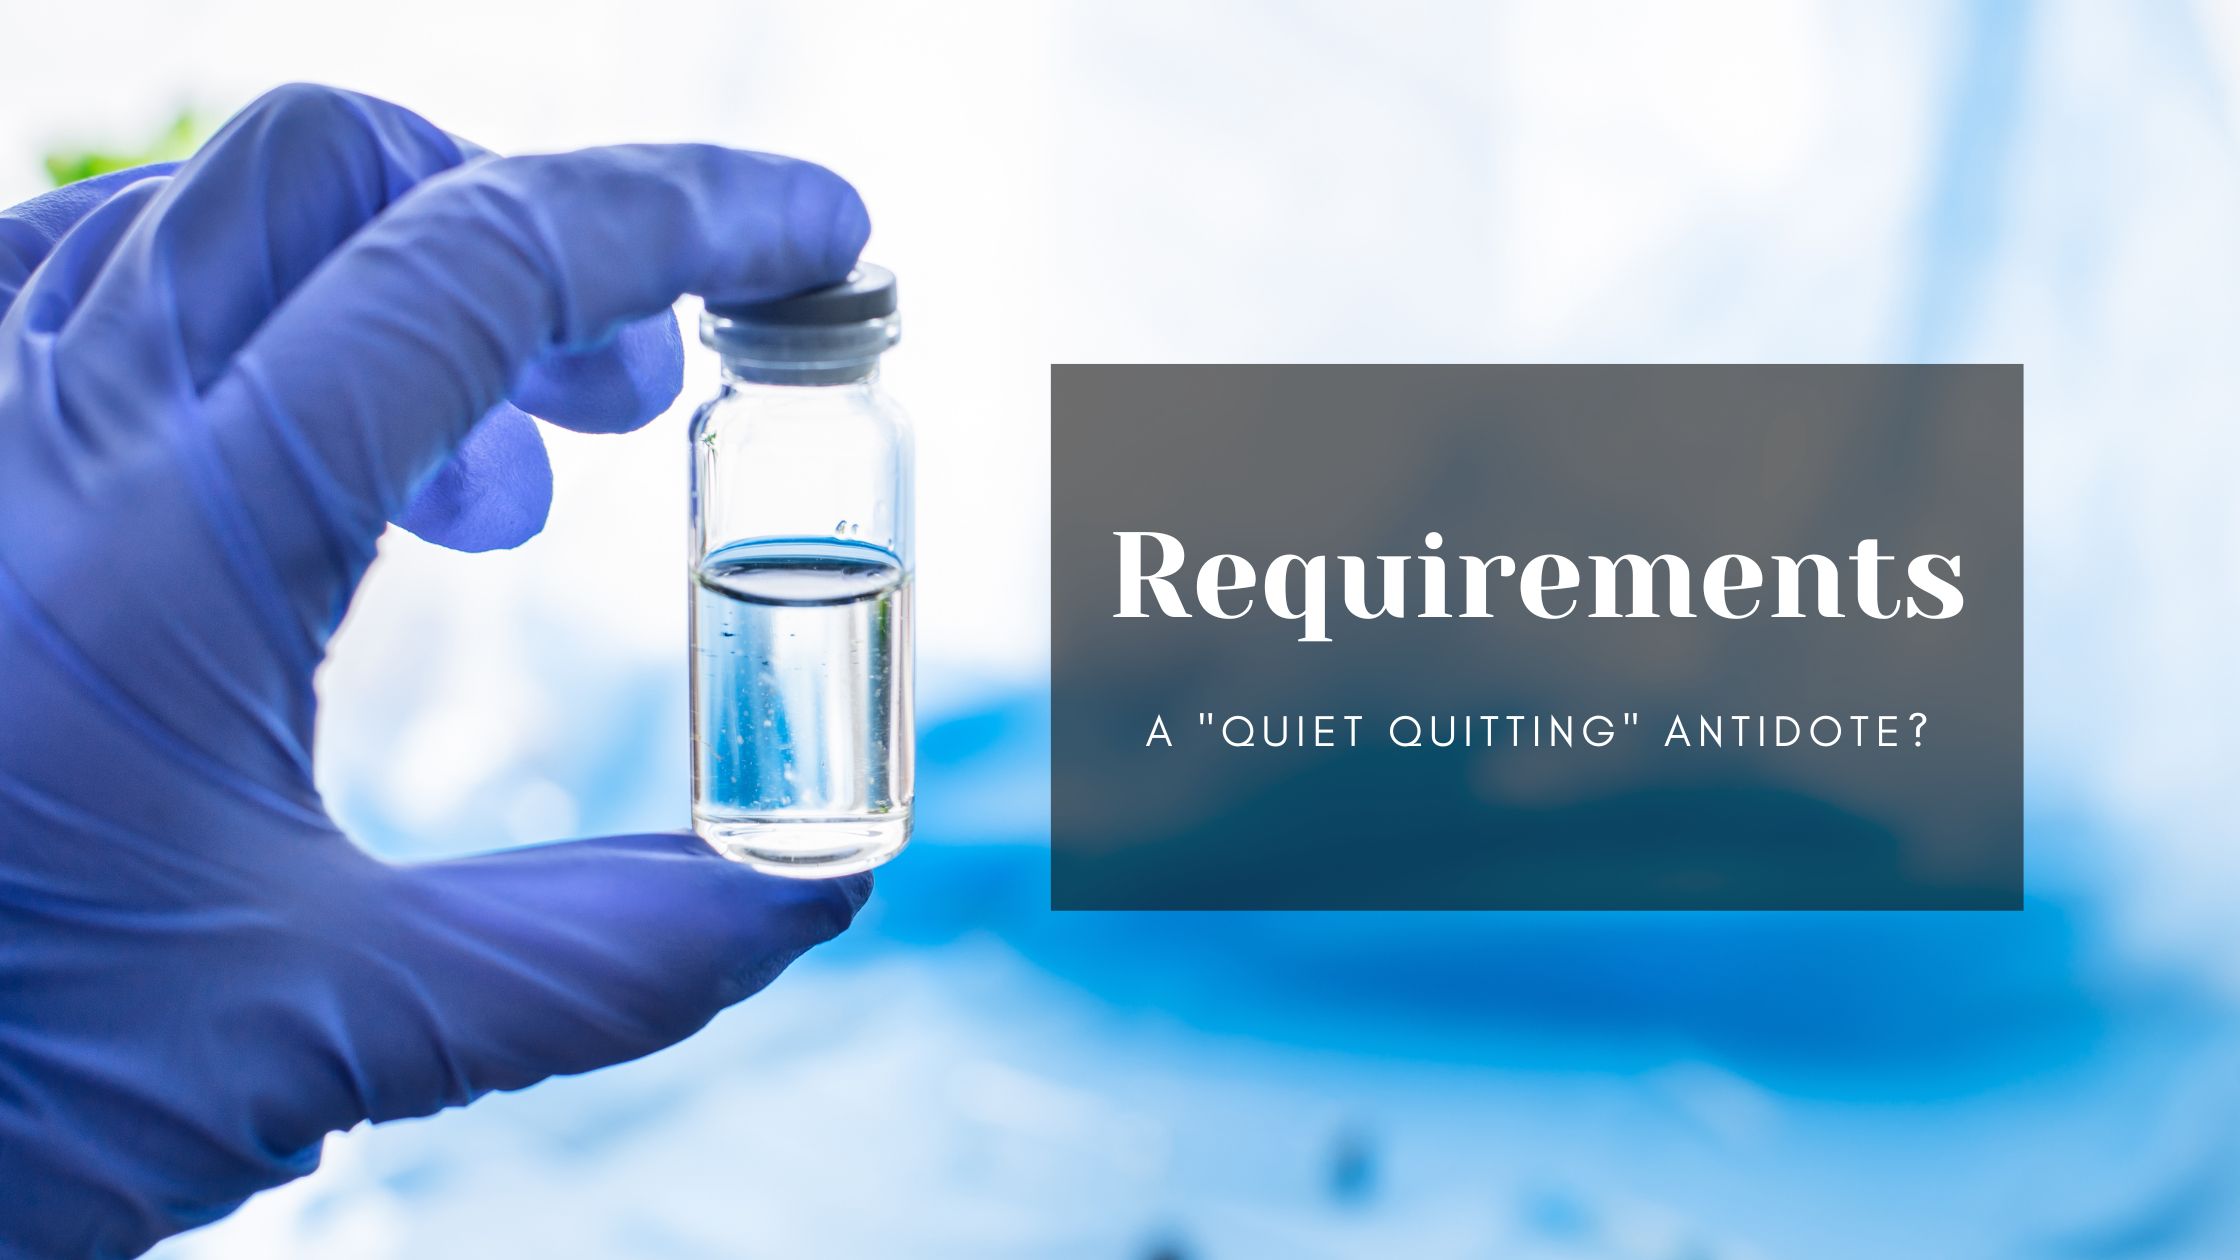 Requirements: A “Quiet Quitting” Antidote?